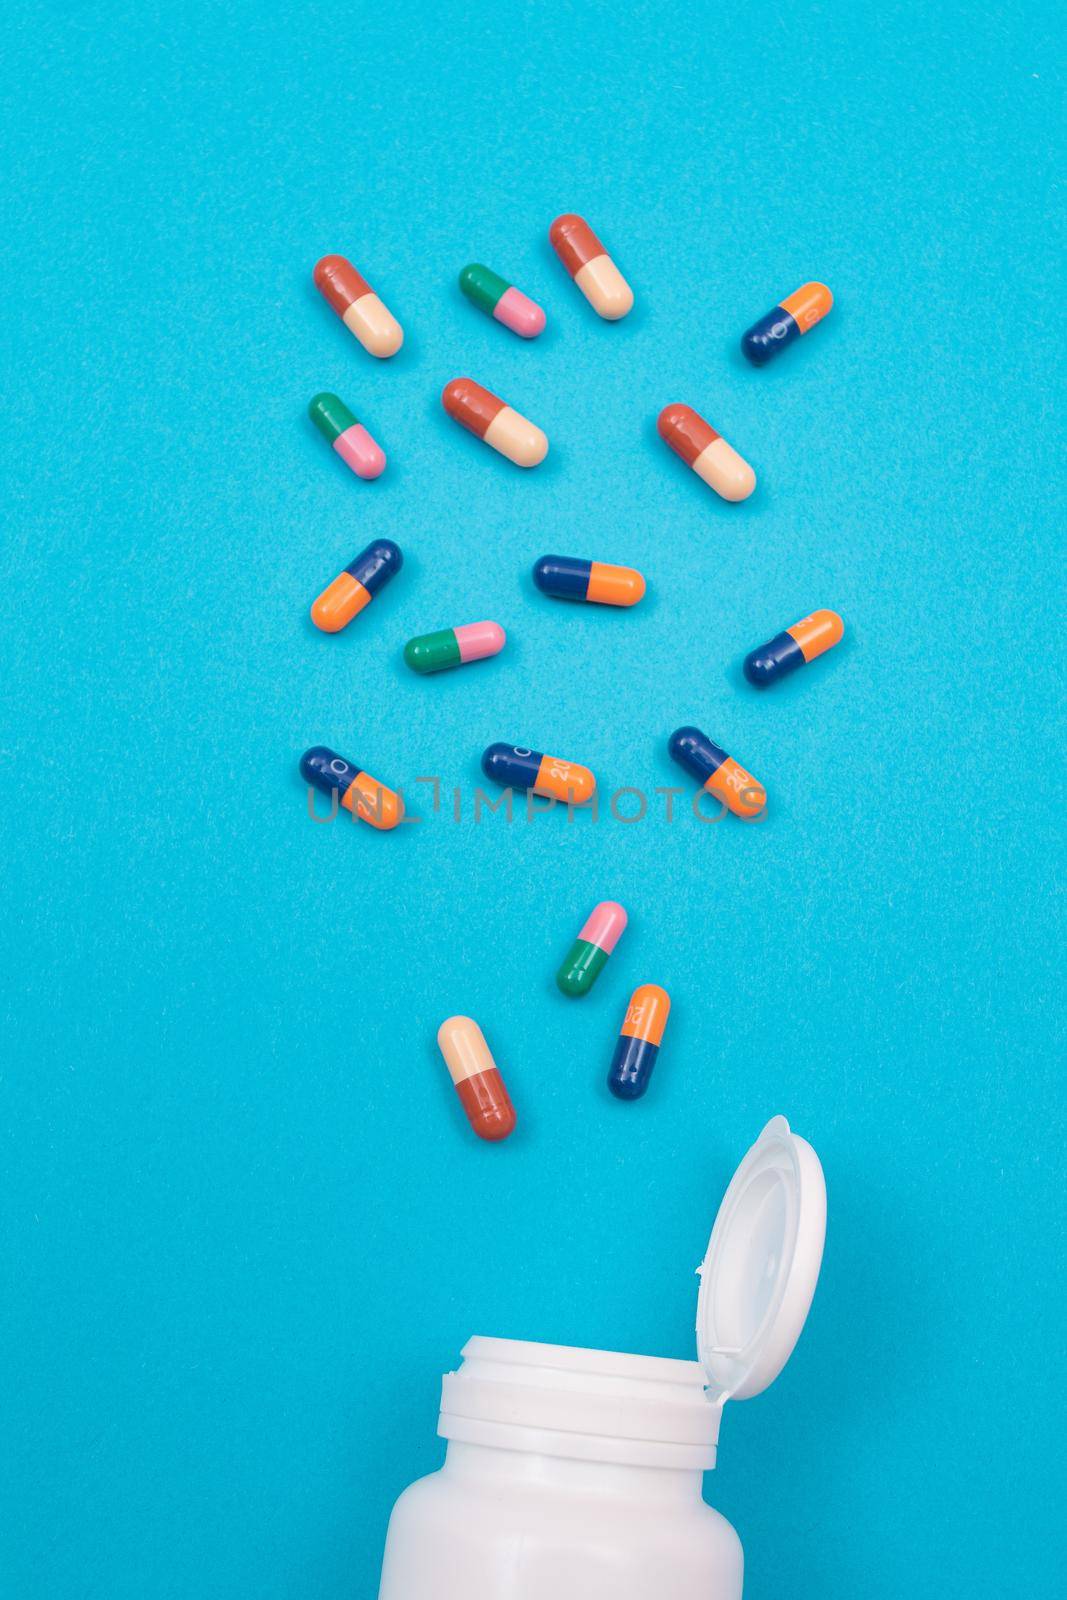 Global Pharmaceutical Industry and Medicinal Products - Colored Pills or Capsules Scattered from the Pill Container, Lying on Blue Background